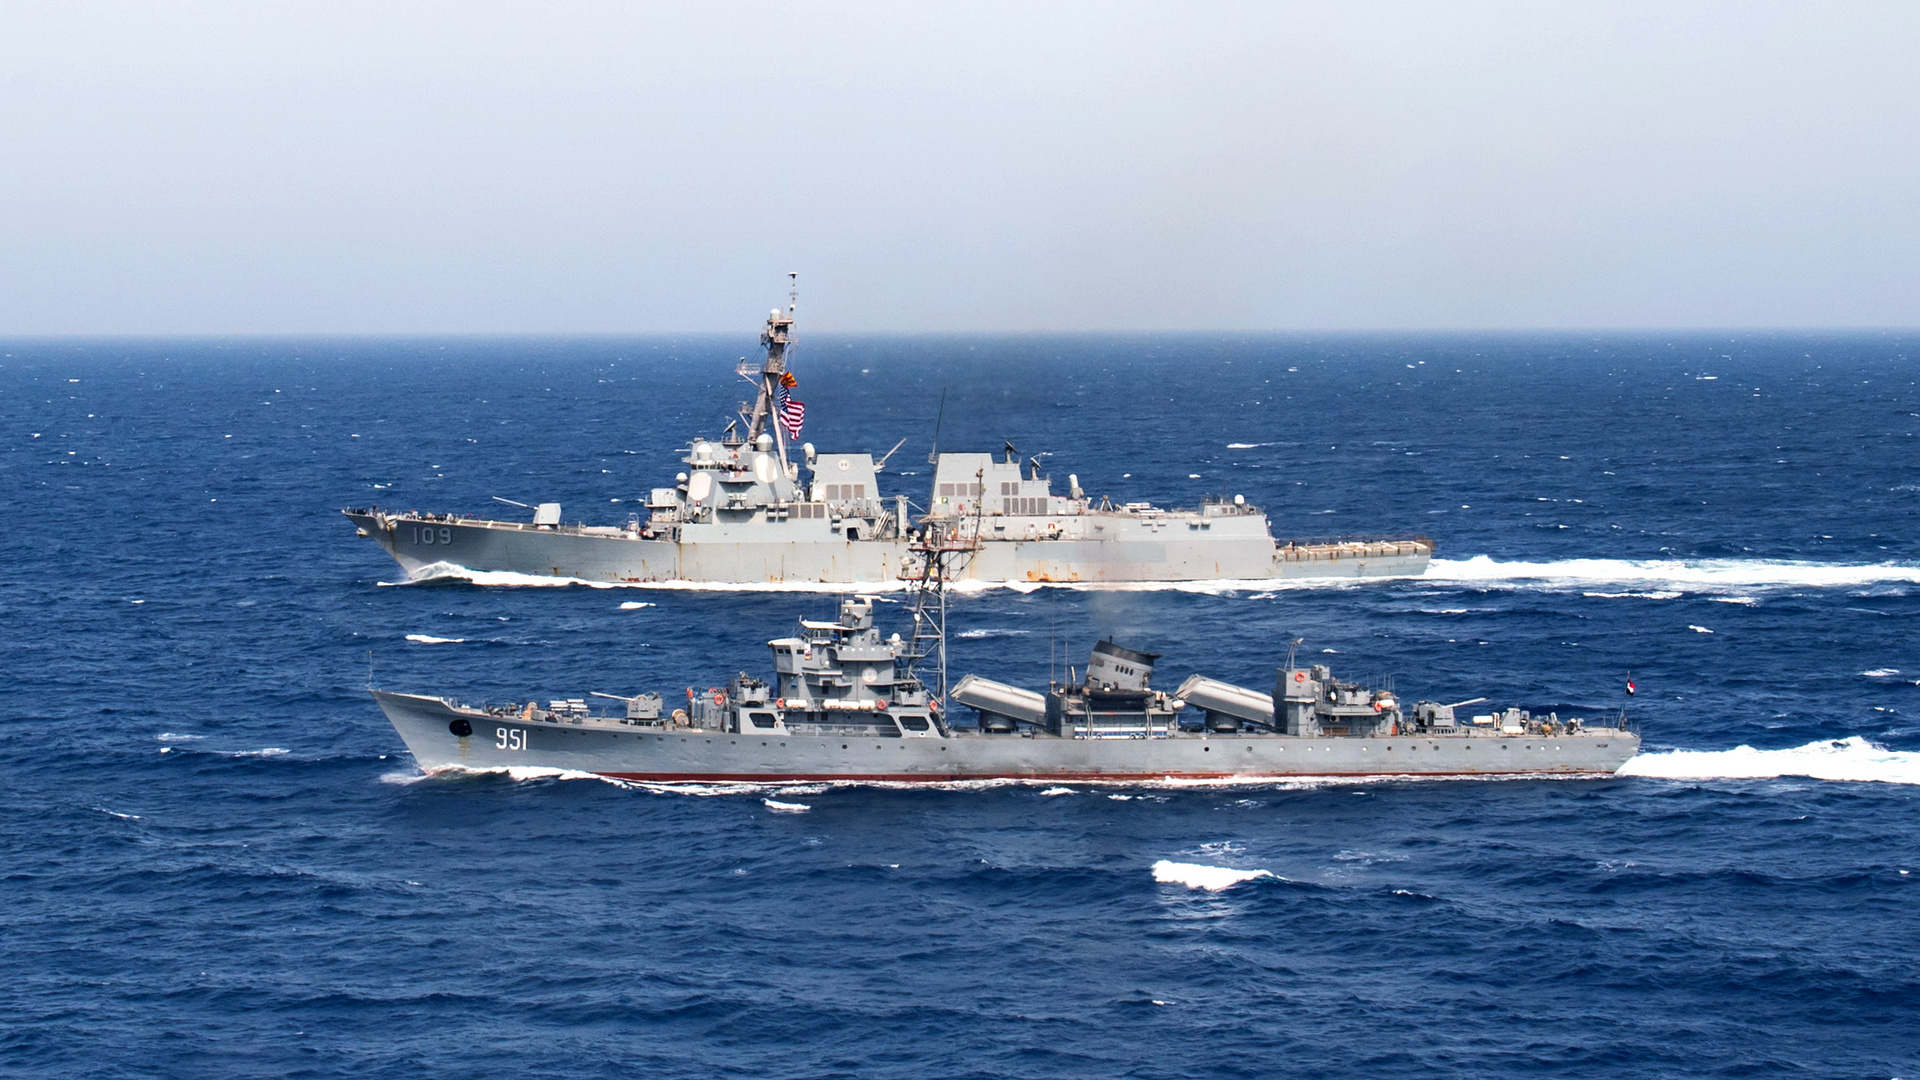 U.S. 5th Fleet Area of Operations : (July 1, 2018) The Egyptian navy frigate El Zafer (F951), bottom, steams alongside the guided-missile destroyer USS Jason Dunham (DDG 109) during a passing exercise. Jason Dunham is deployed to the U.S. 5th Fleet area of operations in support of naval operations to ensure maritime stability and security in the Central region, connecting the Mediterranean and the Pacific through the western Indian Ocean and three strategic choke points. (U.S. Navy photo by Mass Communication Specialist 3rd Class Jonathan Clay. -